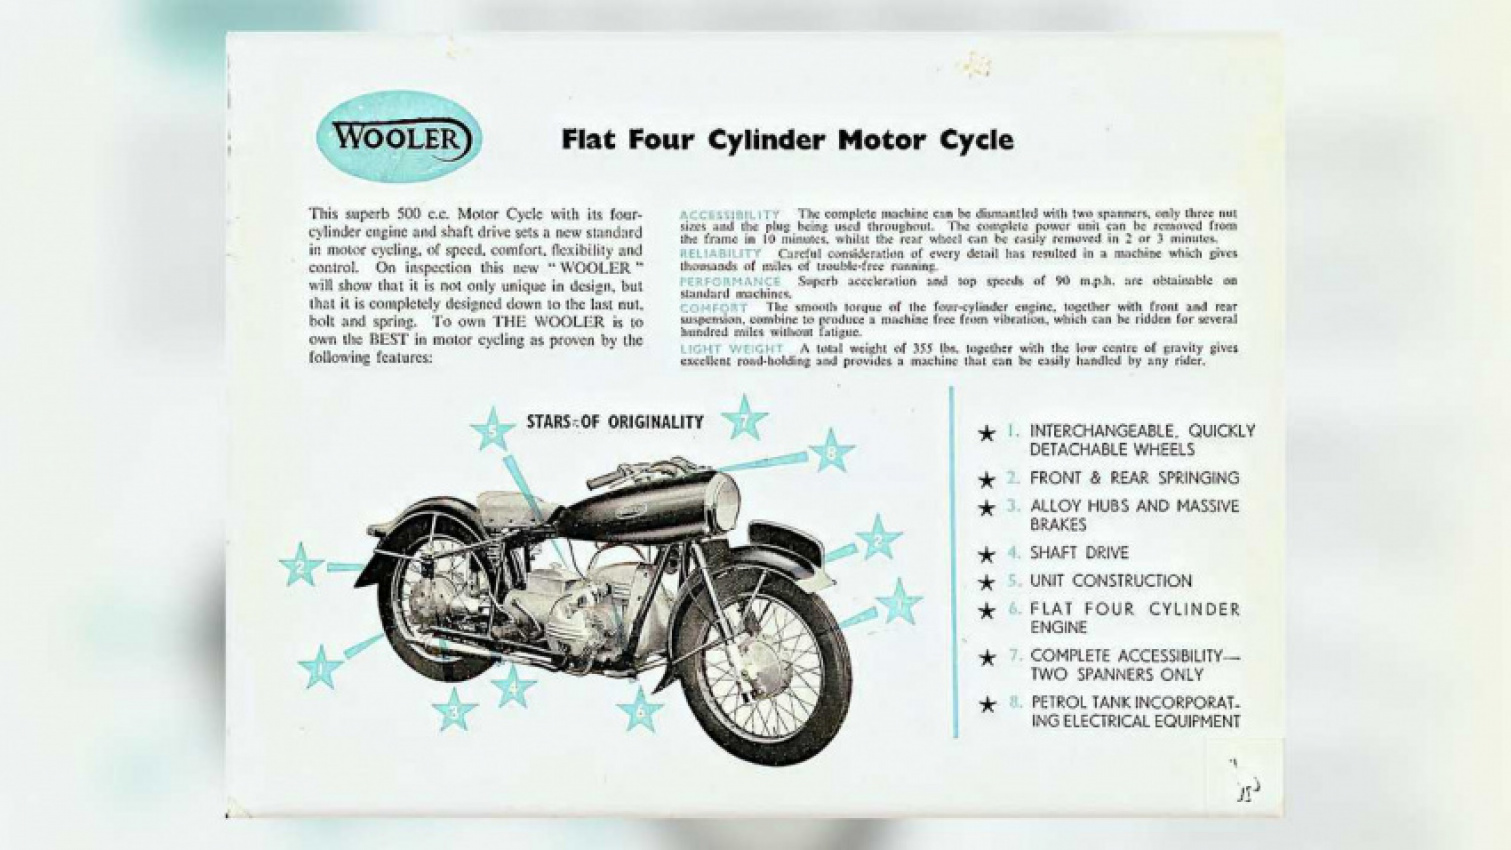 autos, cars, history, cycleweird: the wooler flat four